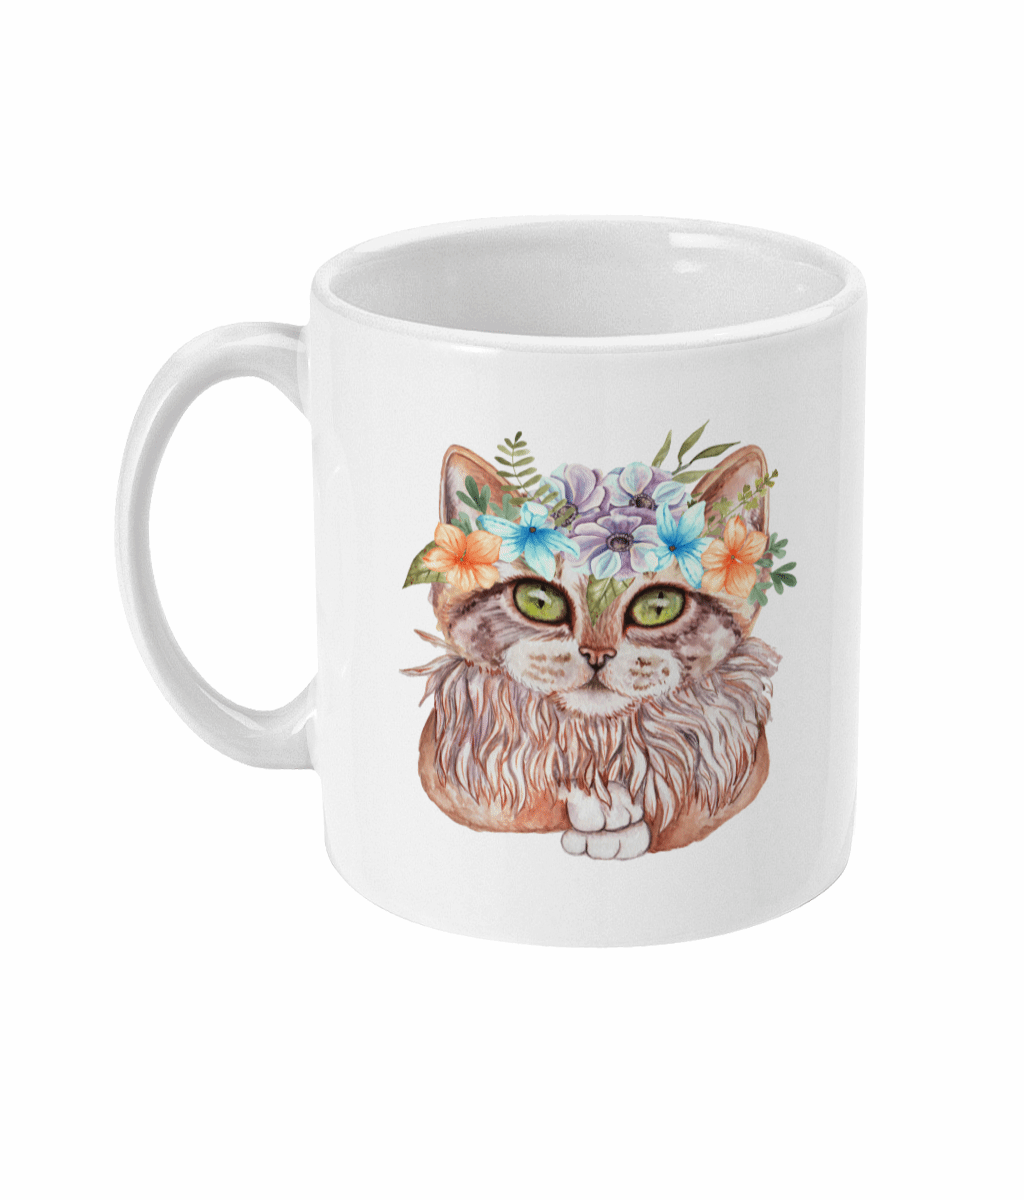  Cat and Floral Head Dress Coffee Mug by Free Spirit Accessories sold by Free Spirit Accessories